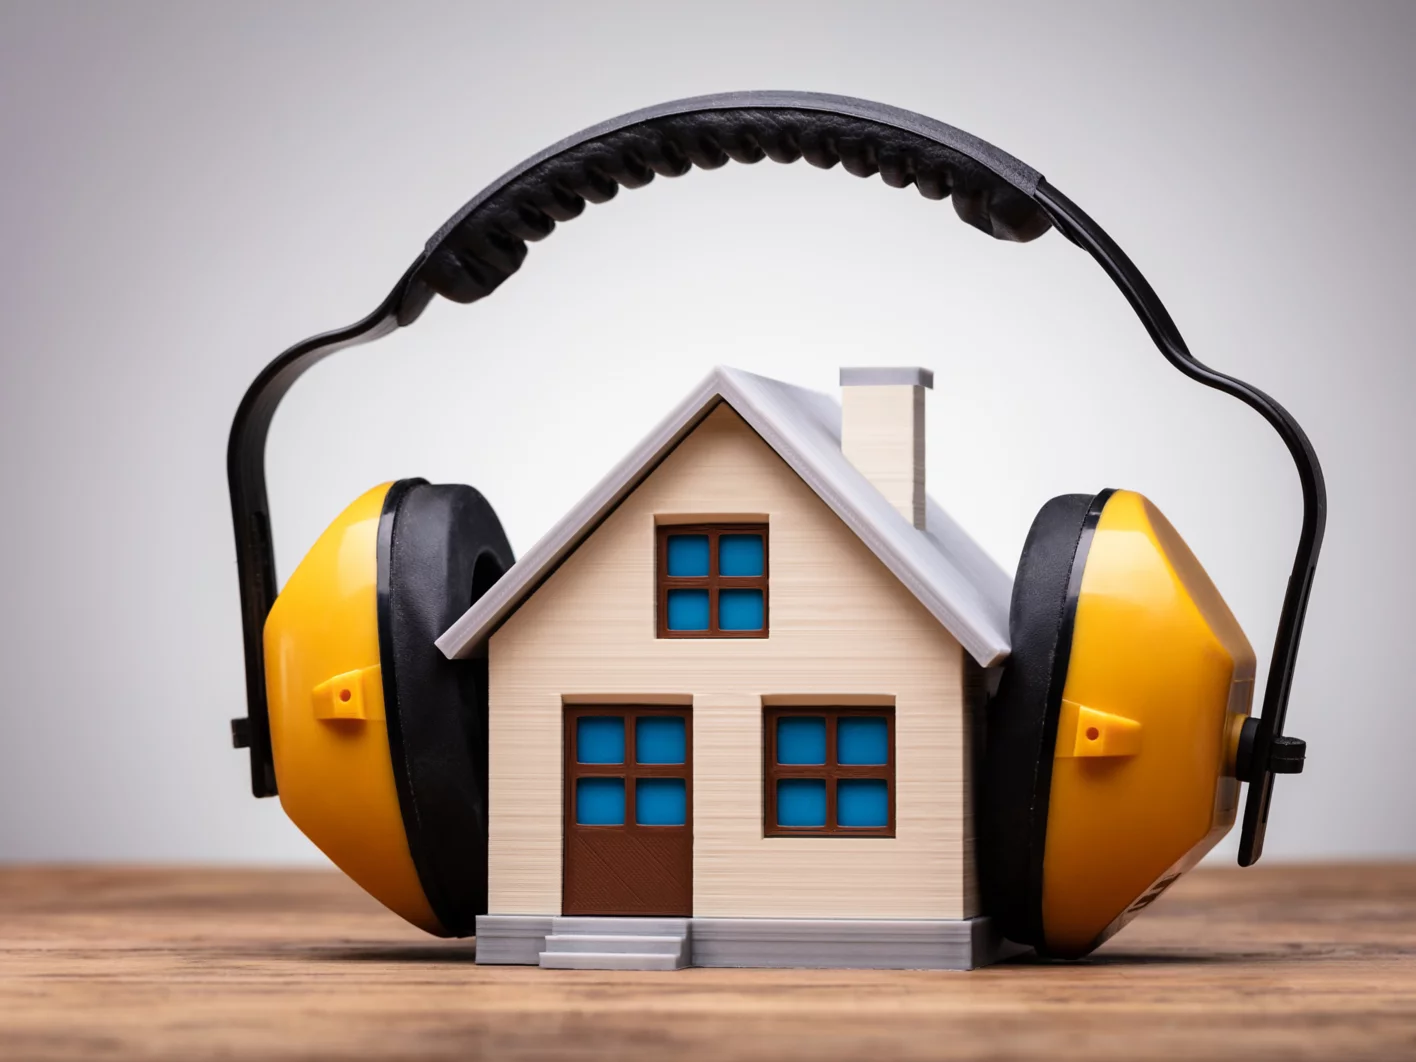 Working Protective Headphone On The House Model